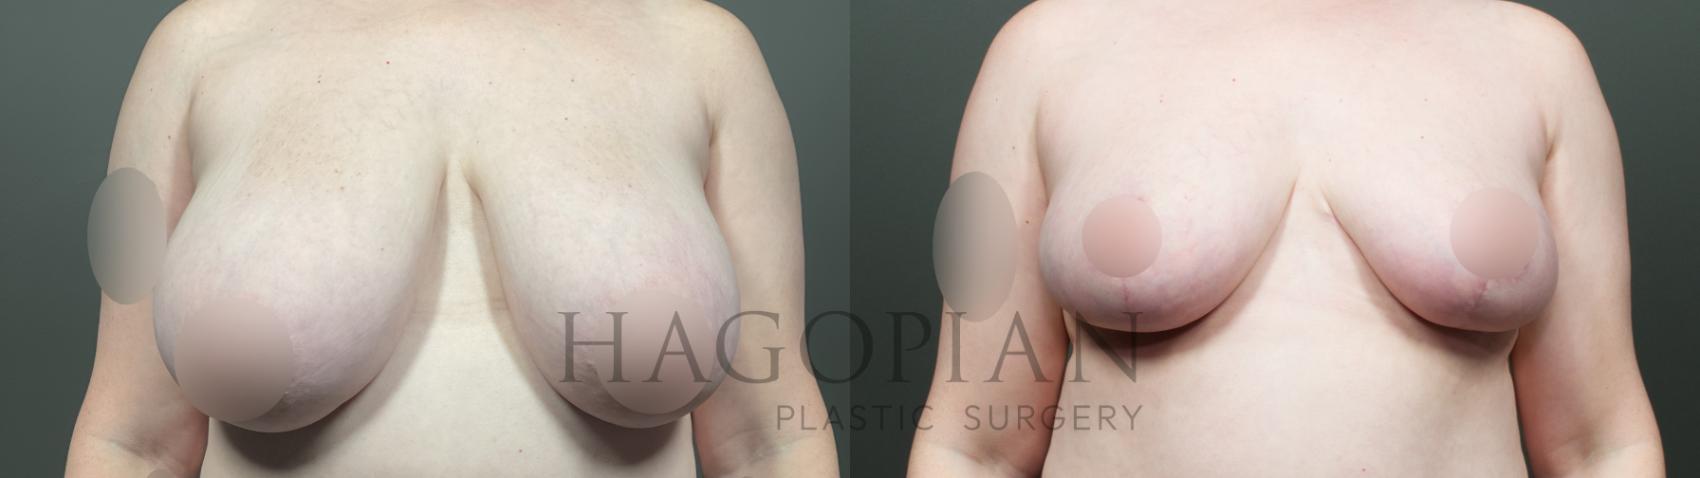 Before & After Breast Reduction Case 19 Front View in Atlanta, GA